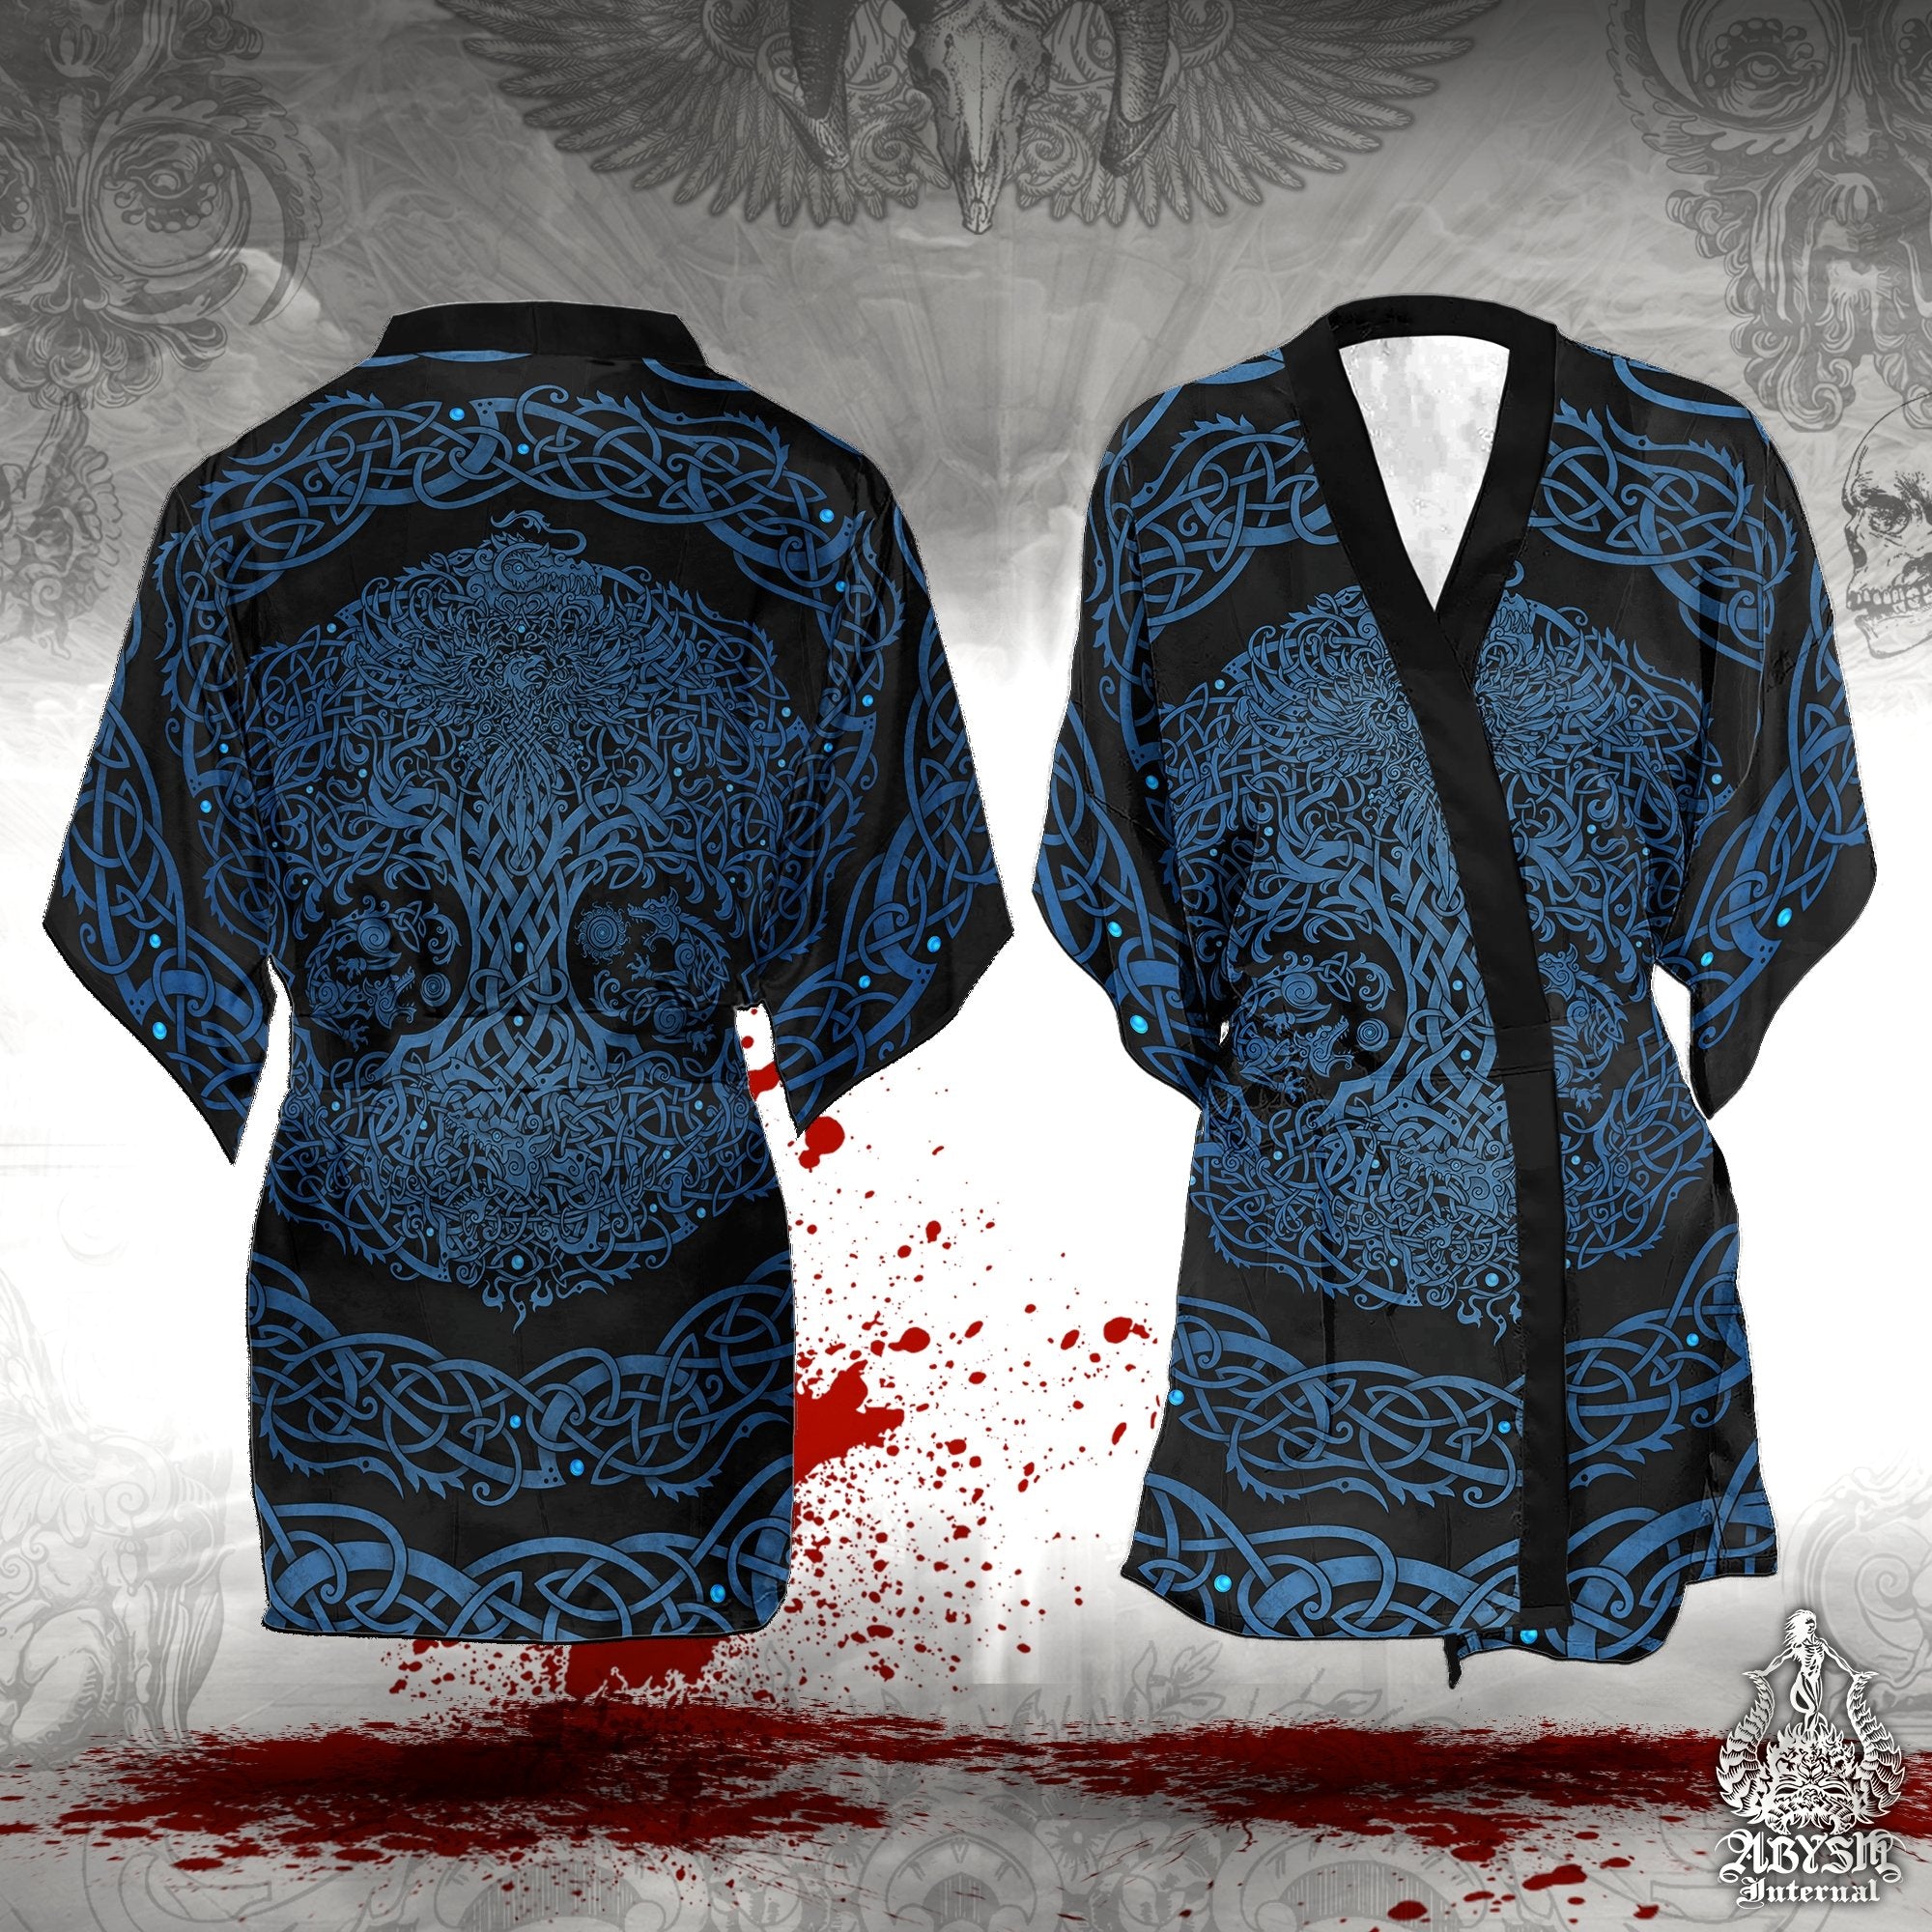 Viking Cover Up, Beach Outfit, Yggdrasil Party Kimono, Summer Festival Robe, Norse Indie and Alternative Clothing, Unisex - Tree of Life, Blue Black - Abysm Internal